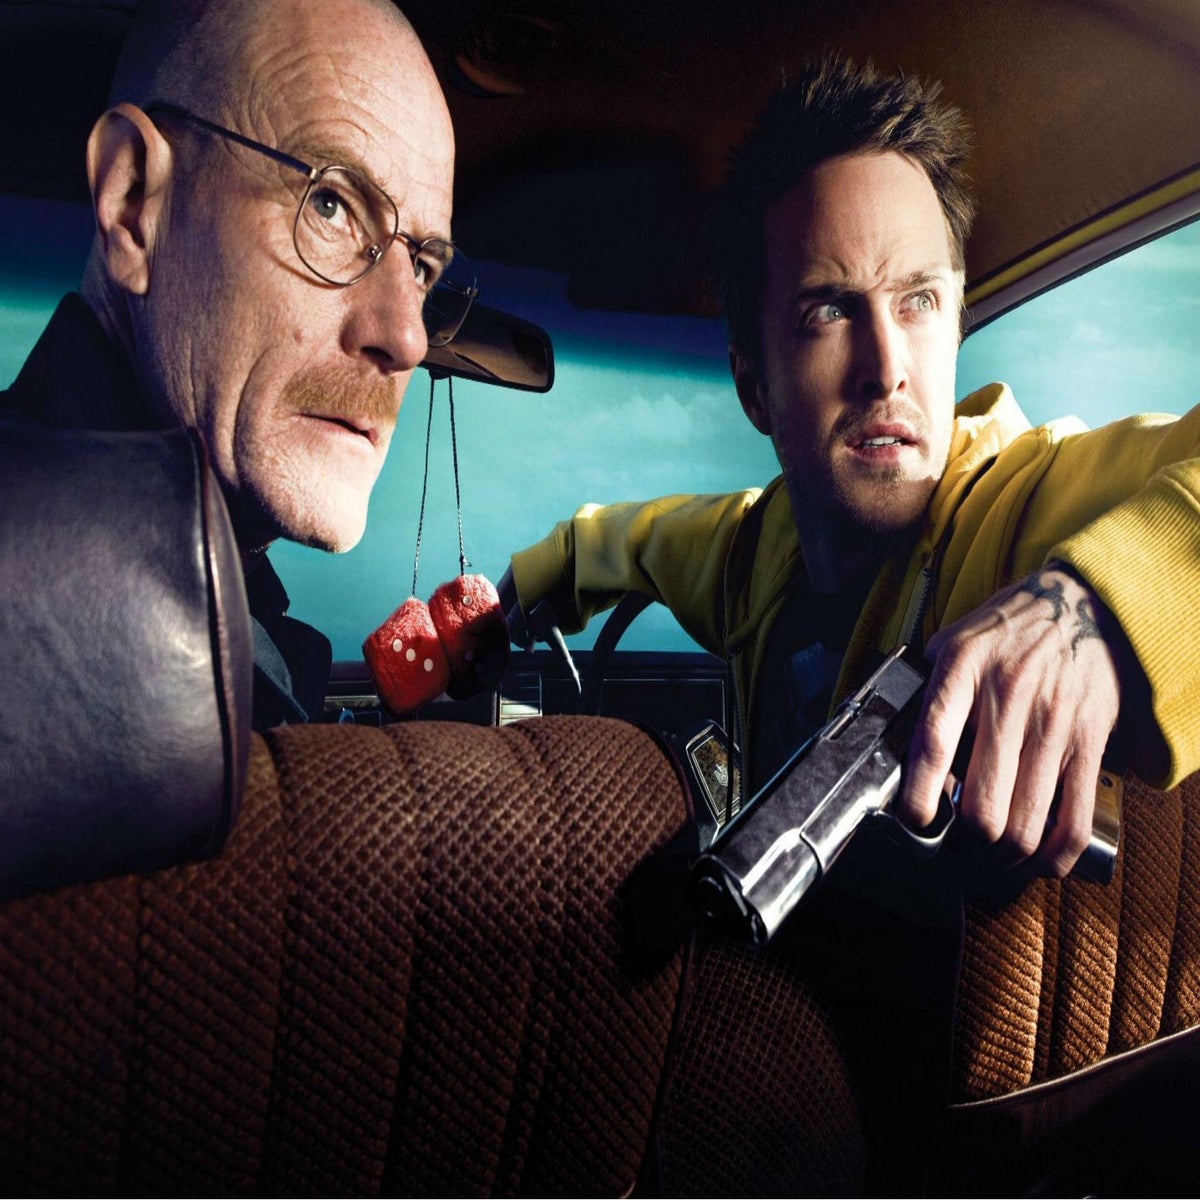 10 years ago, Breaking Bad produced its greatest episode ever